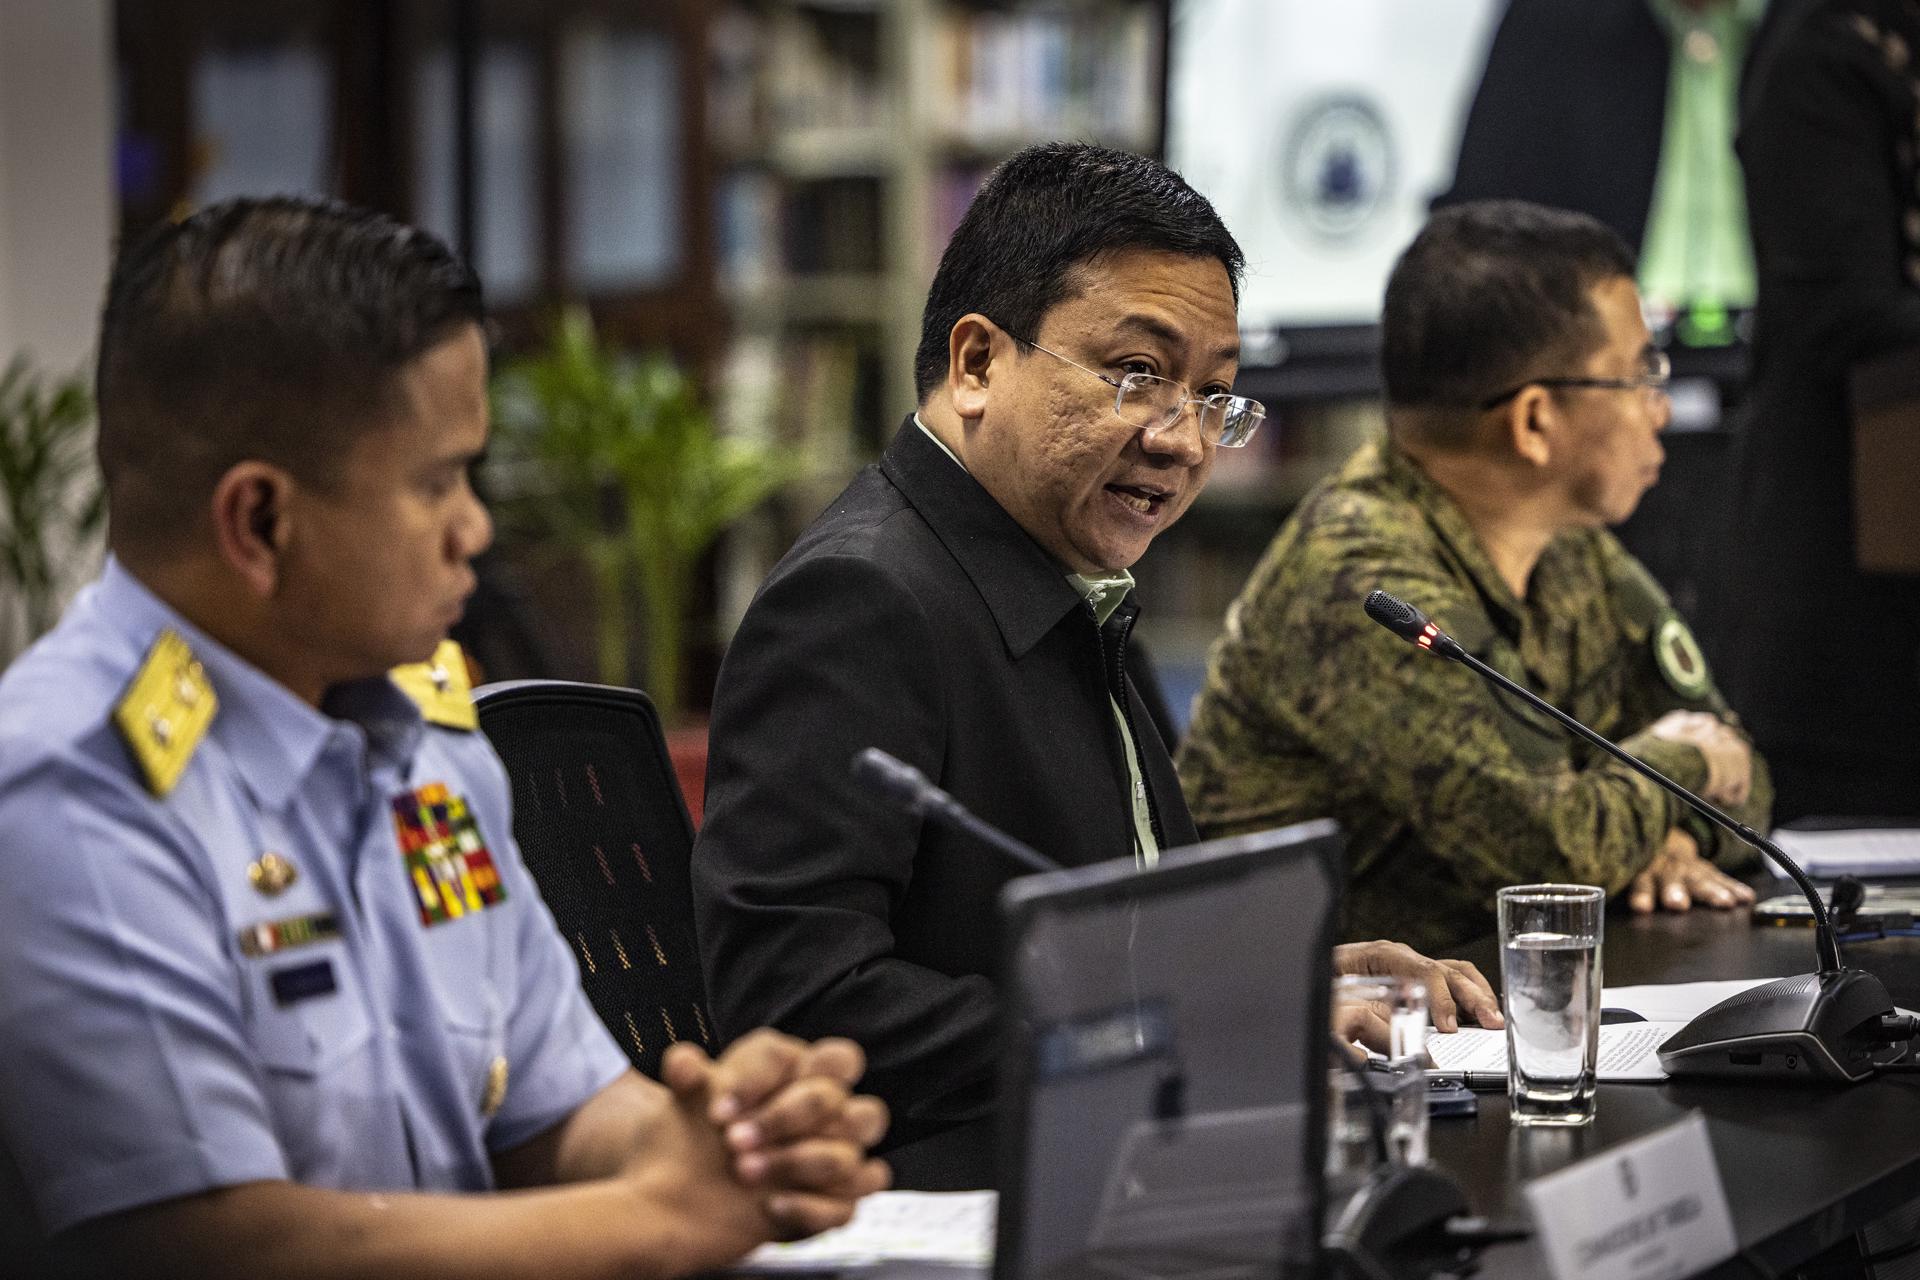 (L-R) Philippine Coast Guard (PCG) Commodore Jay Tarriela, spokesperson for the West Philippine Sea, spokesperson for the National Security Council Jonathan Malaya and spokesperson for the Armed Forces of the Philippines, Colonel Medel Aguilar, during a press conference at the Department of Foreign Affairs office in Manila, Philippines, 07 August 2023. EFE-EPA/EZRA ACAYAN / POOL
